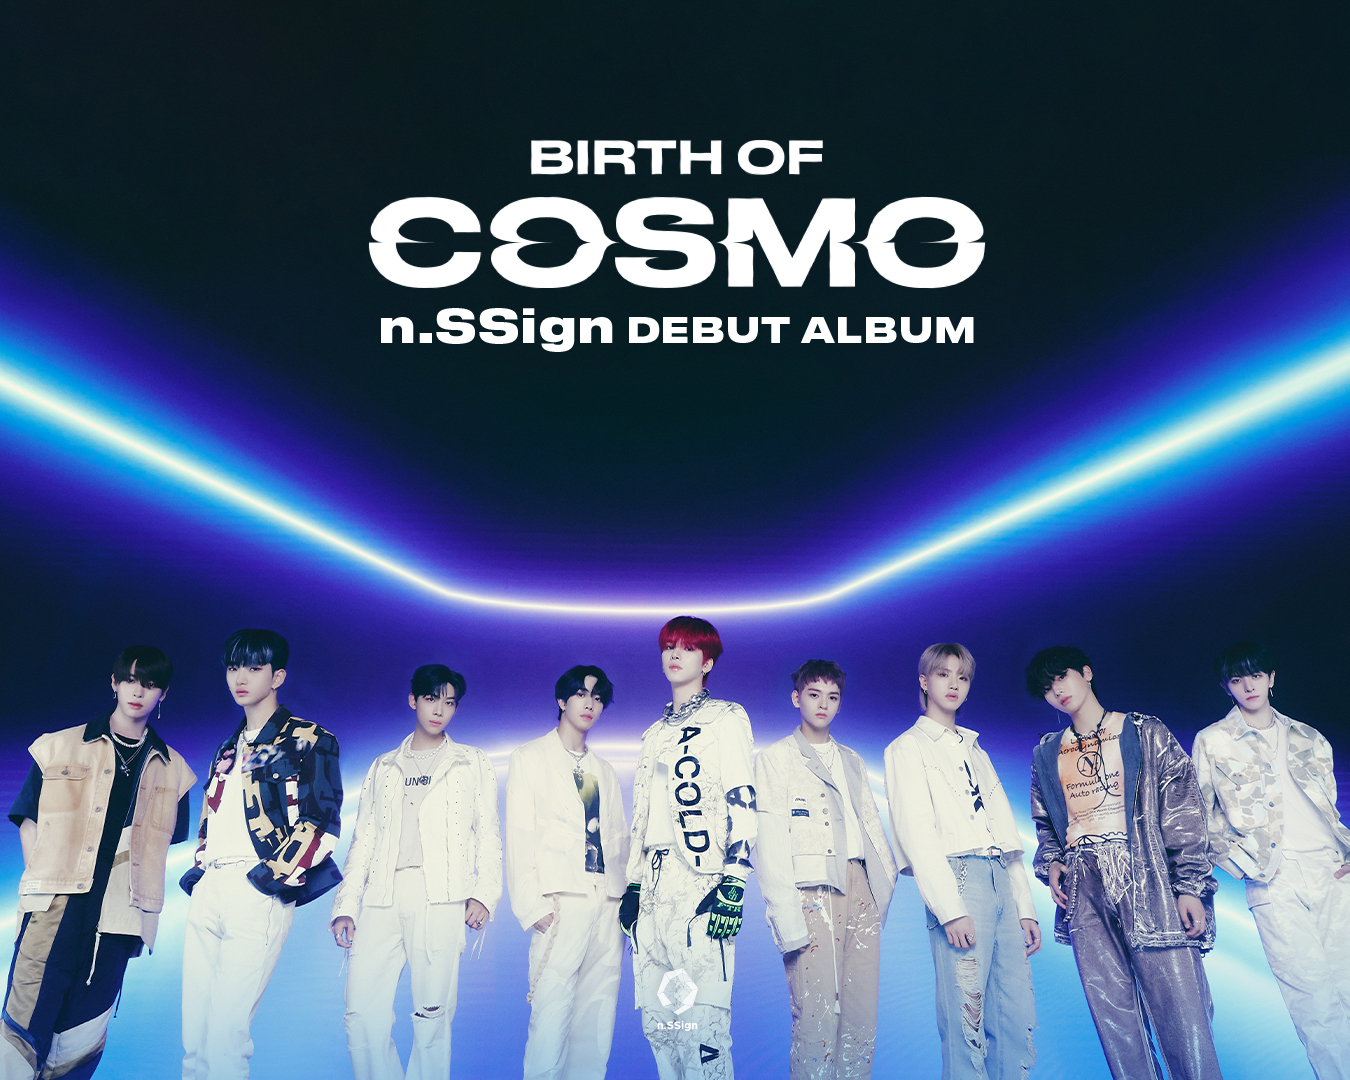 《n.SSign DEBUT ALBUM : ‘BIRTH OF COSMO’》 CONCEPT PHOTO A – Feast of light